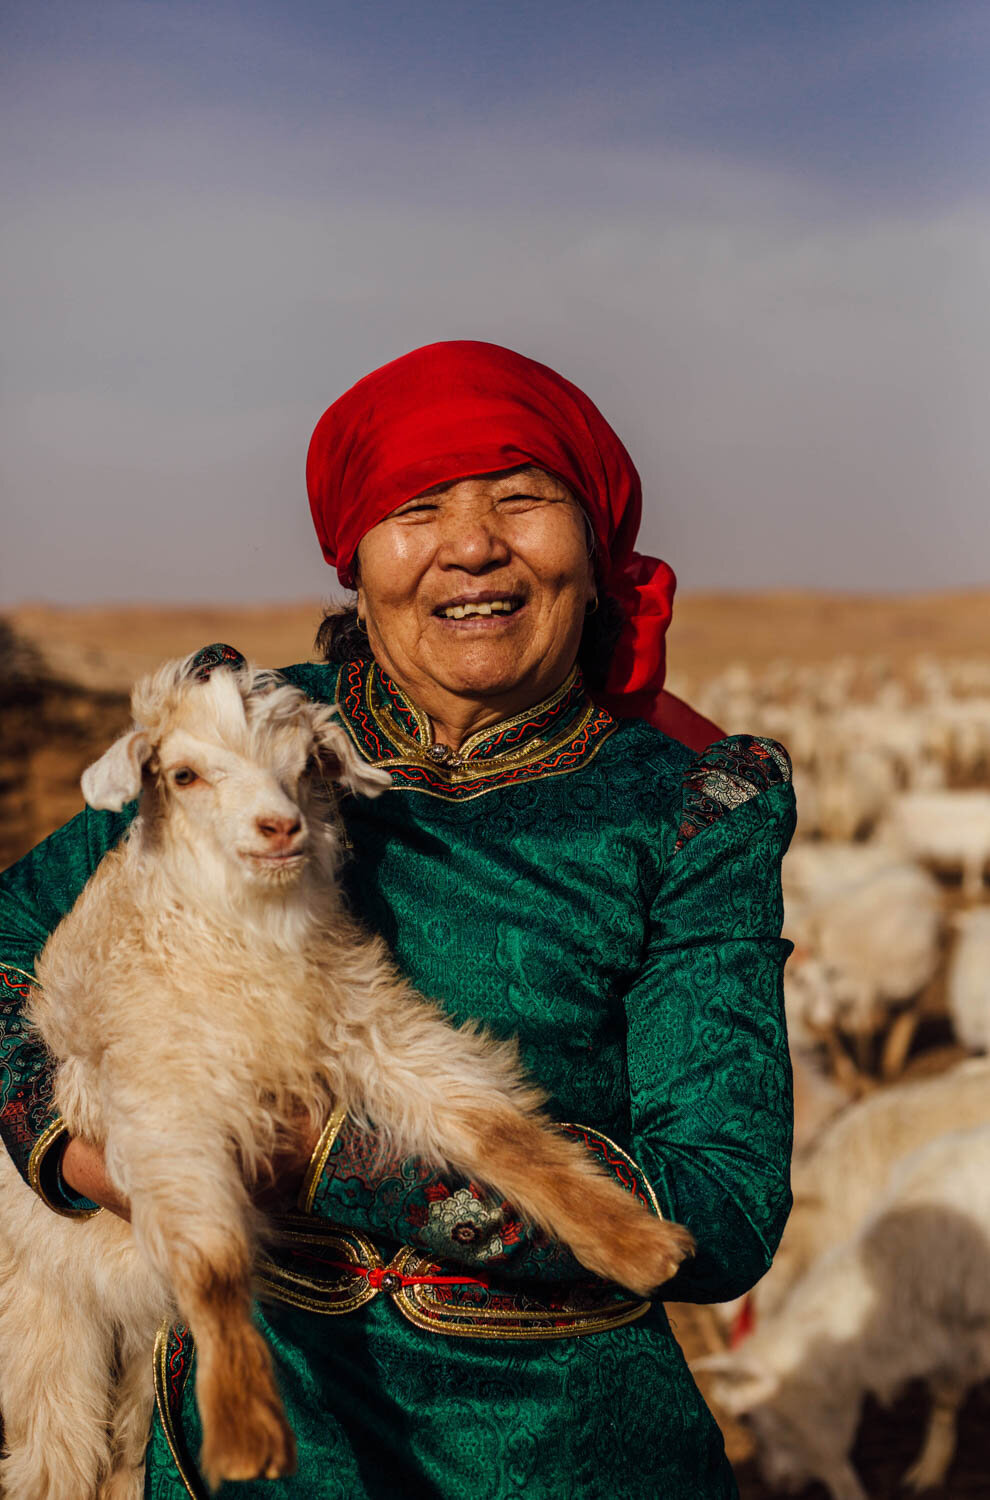 The journey of cashmere, Mongolia 2019